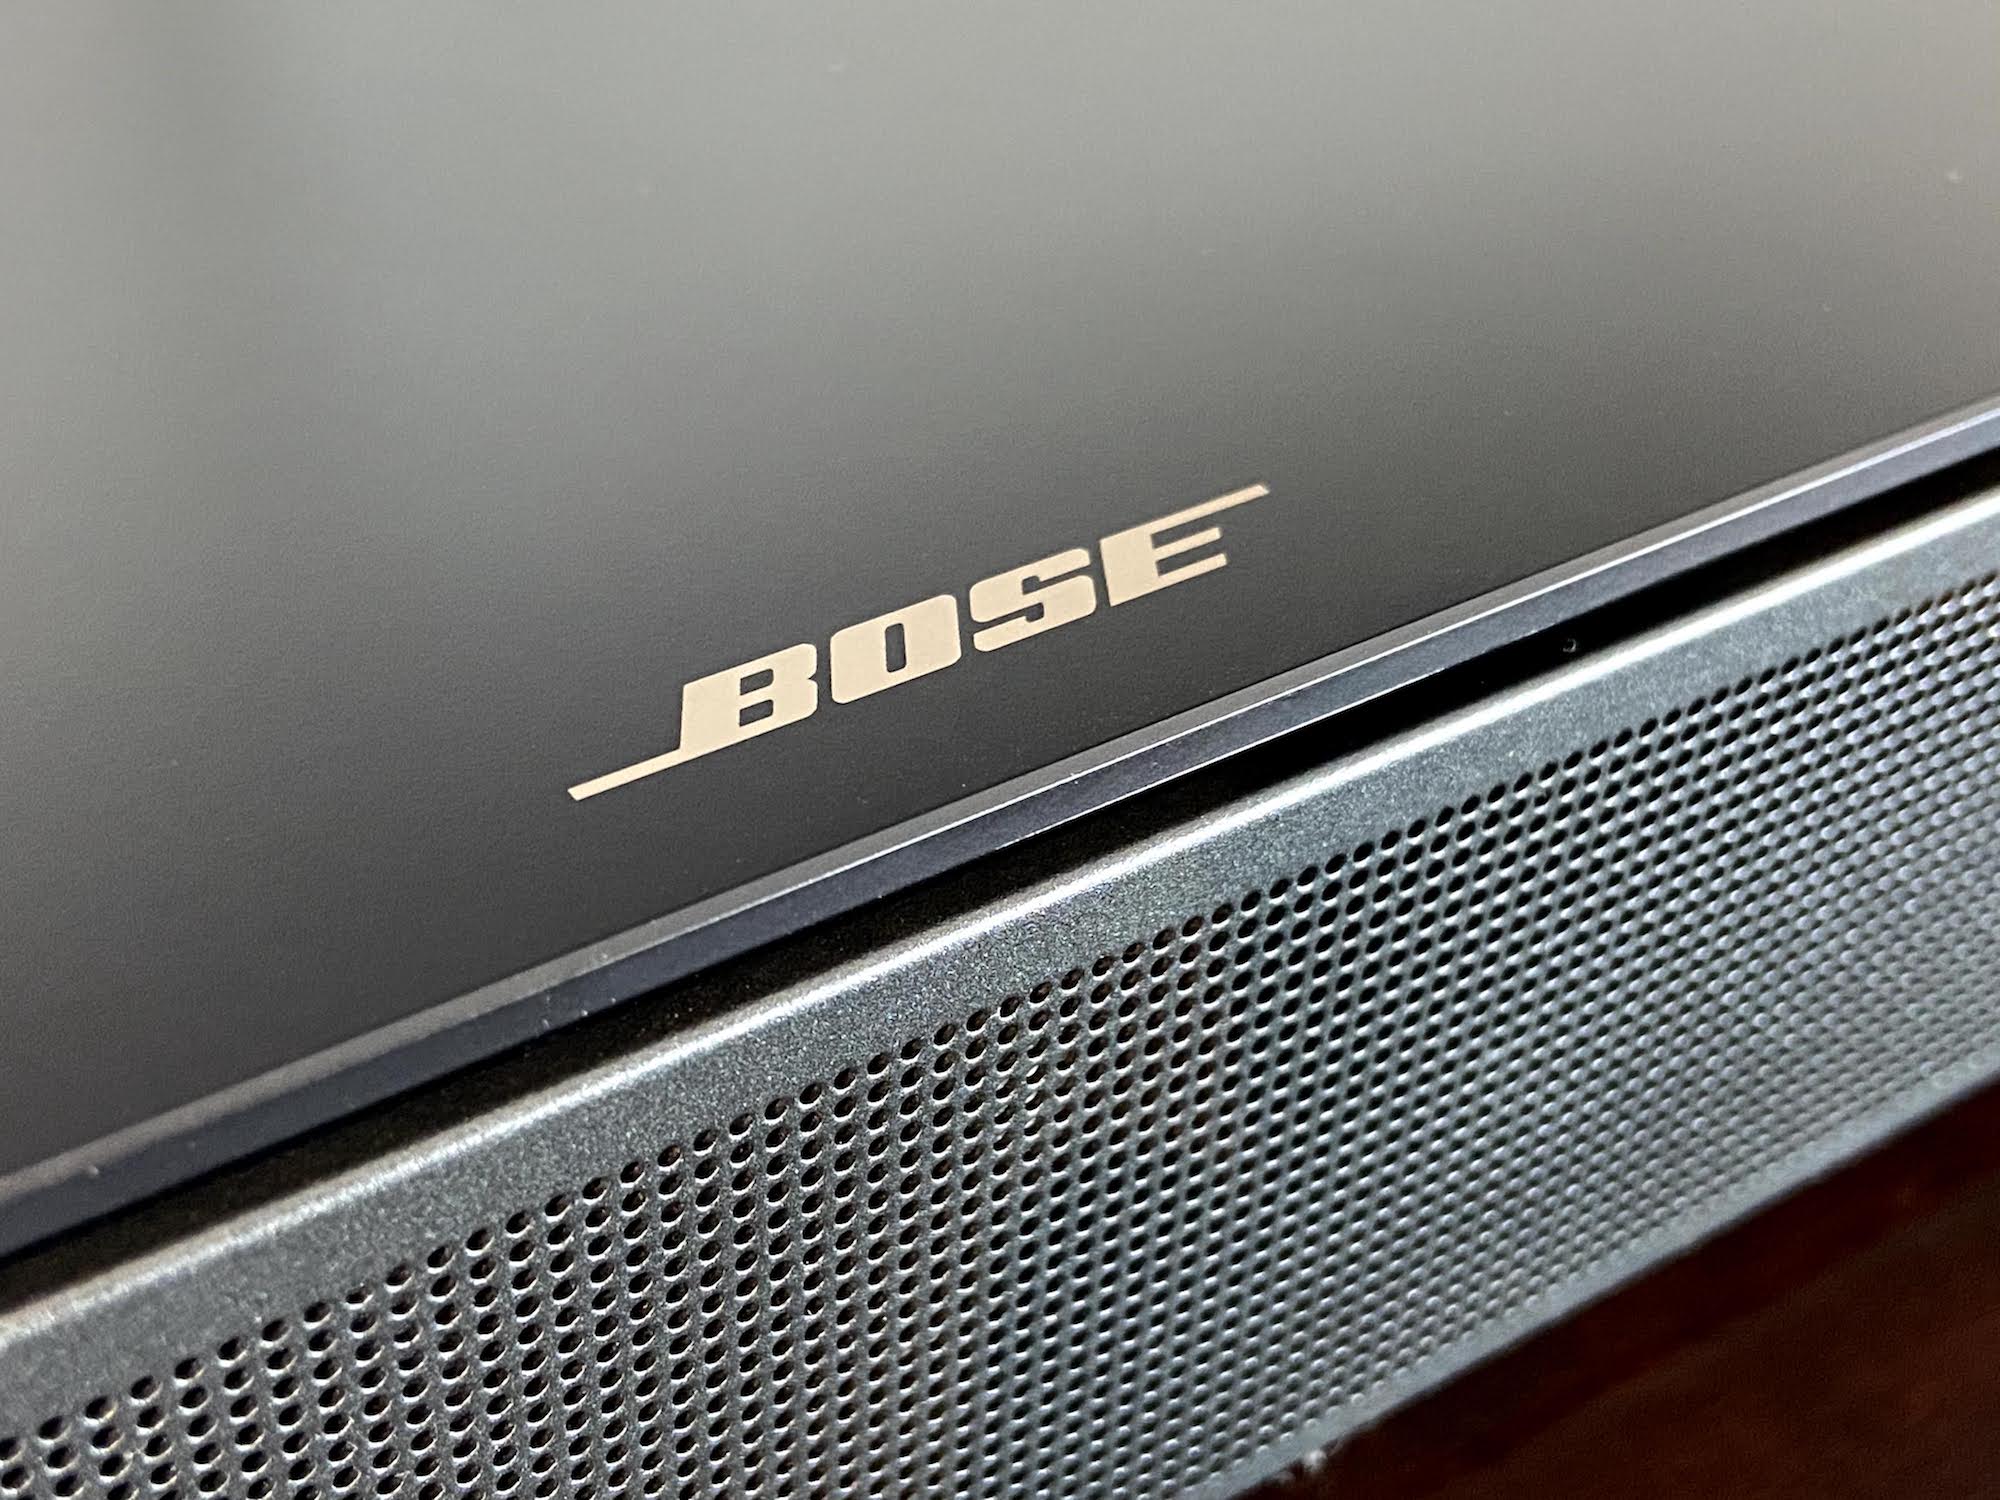 Bose TV Speaker Powered 3-channel sound bar with Bluetooth® at